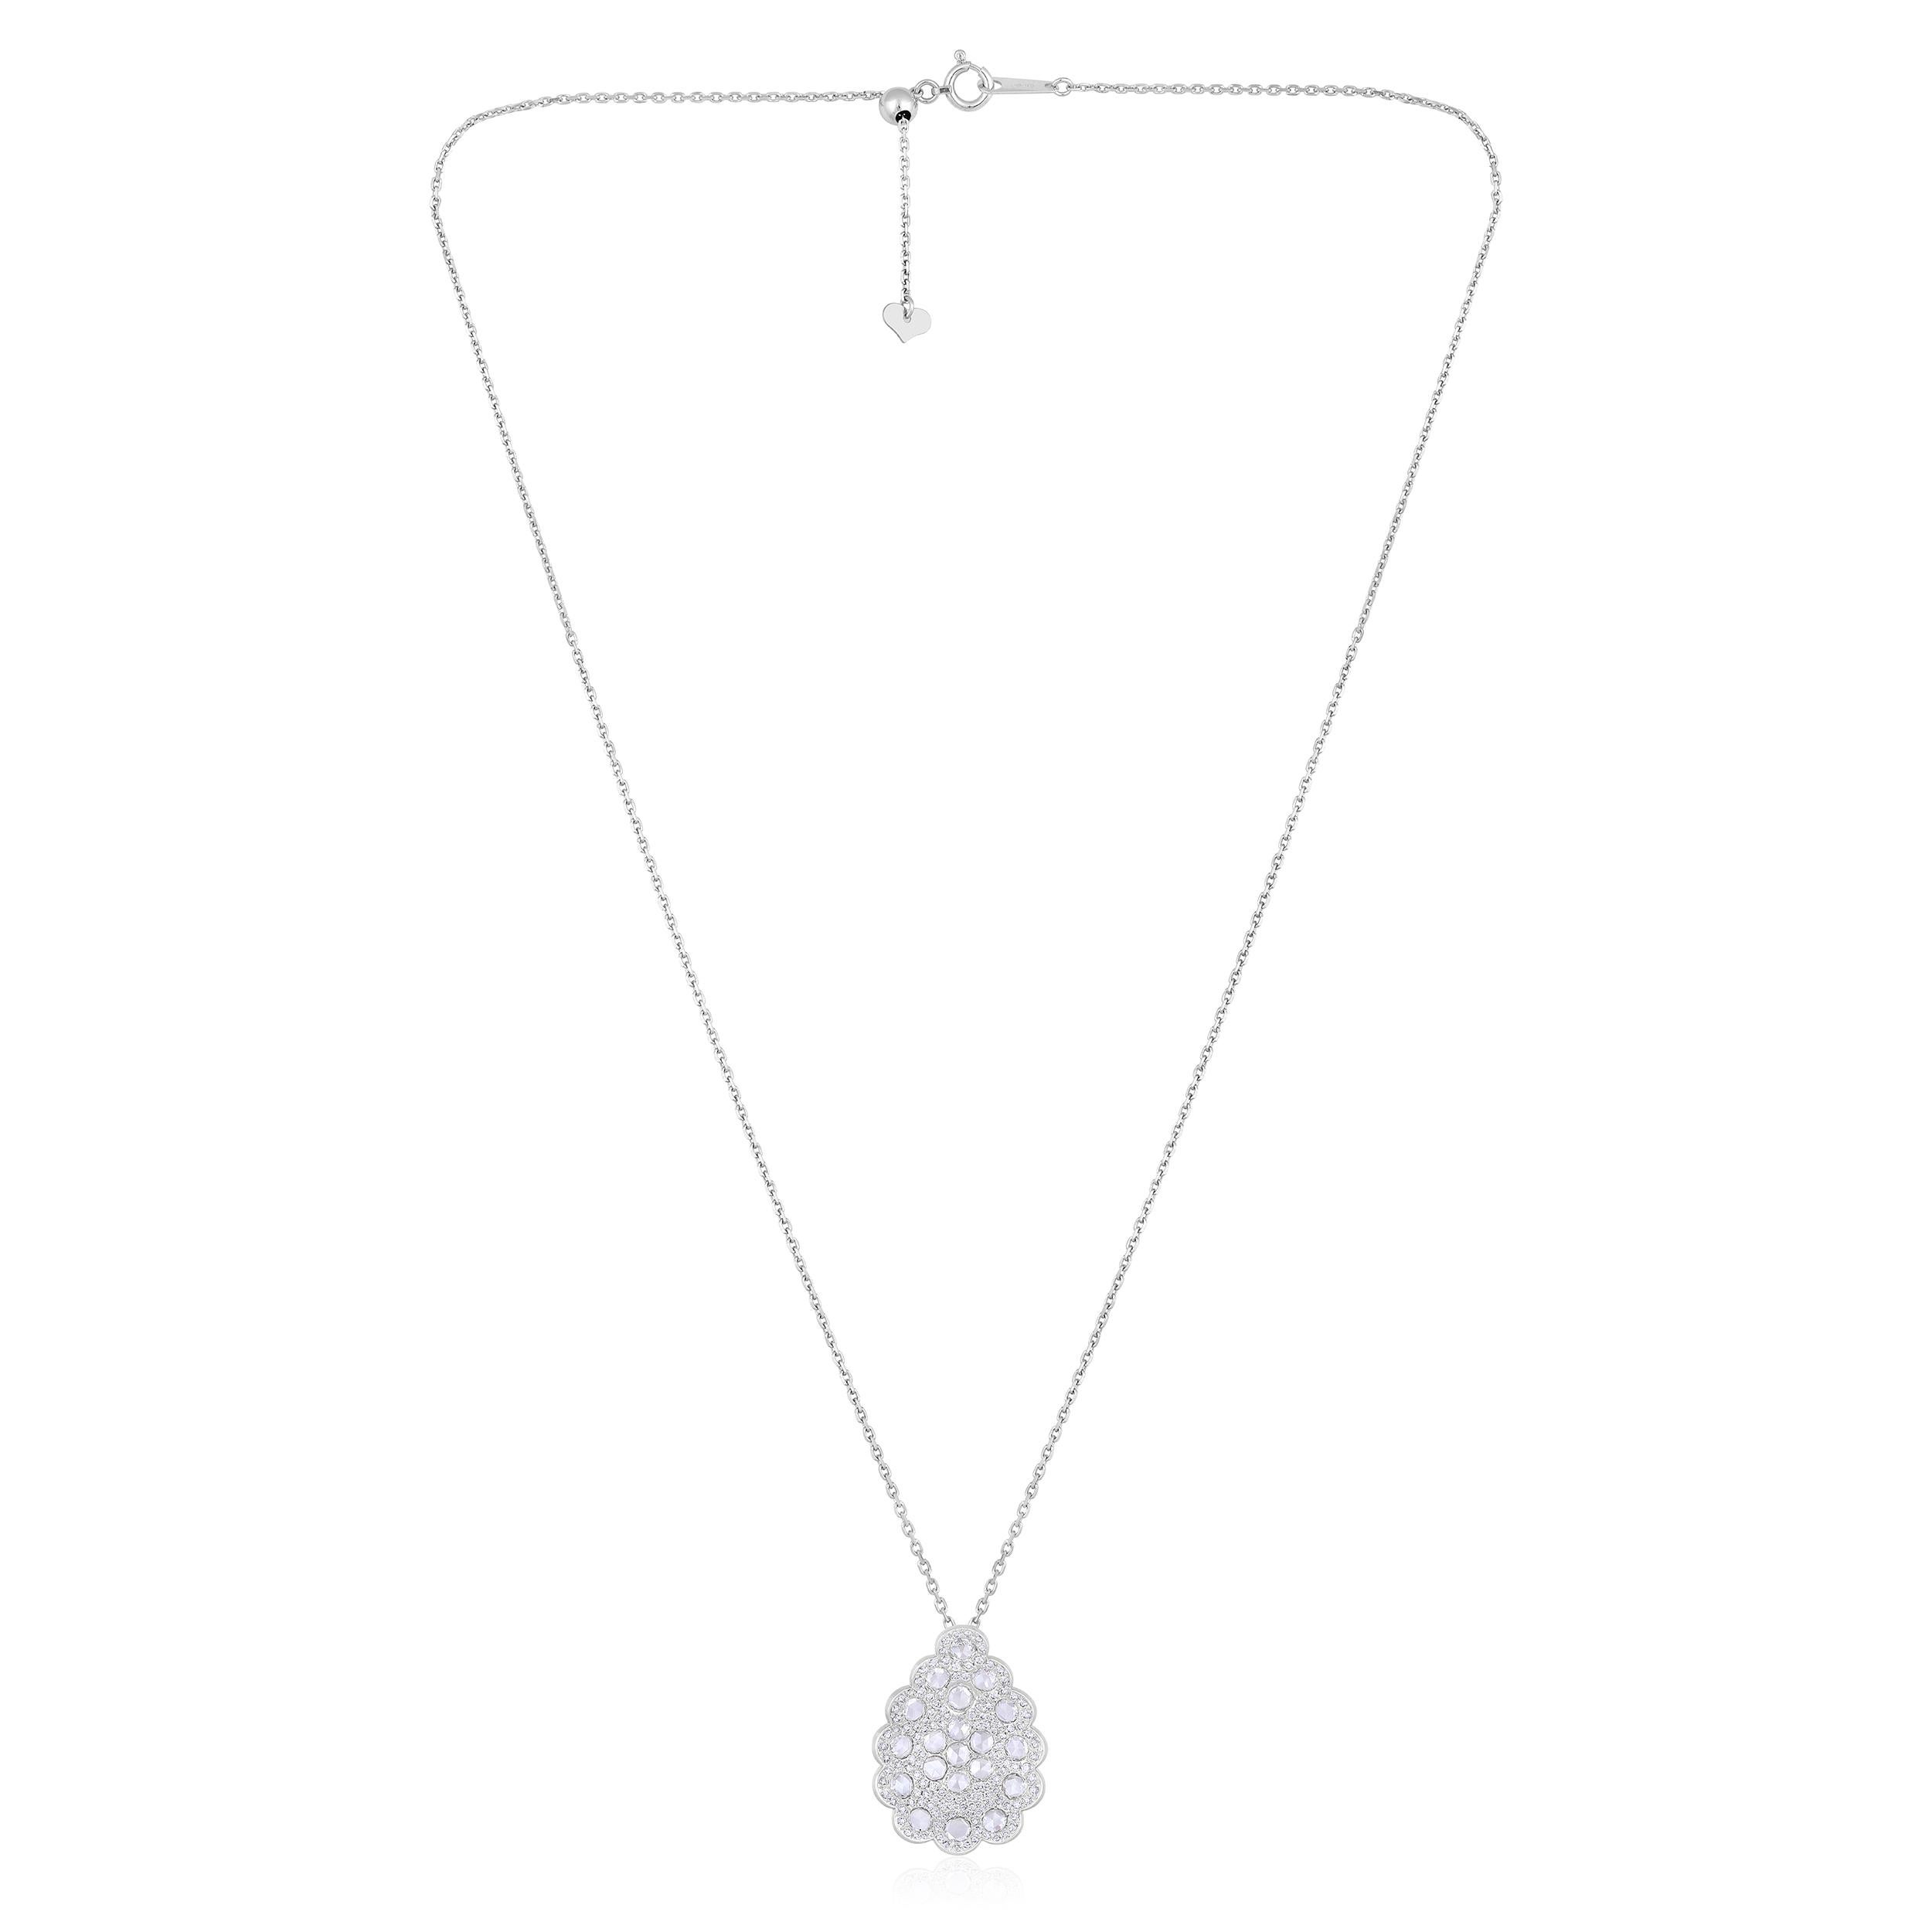 Crafted in 5.95 grams of 18K White Gold, the necklace contains 20 stones of Rose Cut Natural Diamonds with a total of 1.24 carat in E-F color and VVS-VS clarity combined with 135 stones of Round Natural Diamonds with a total of 0.6 carat in E-F